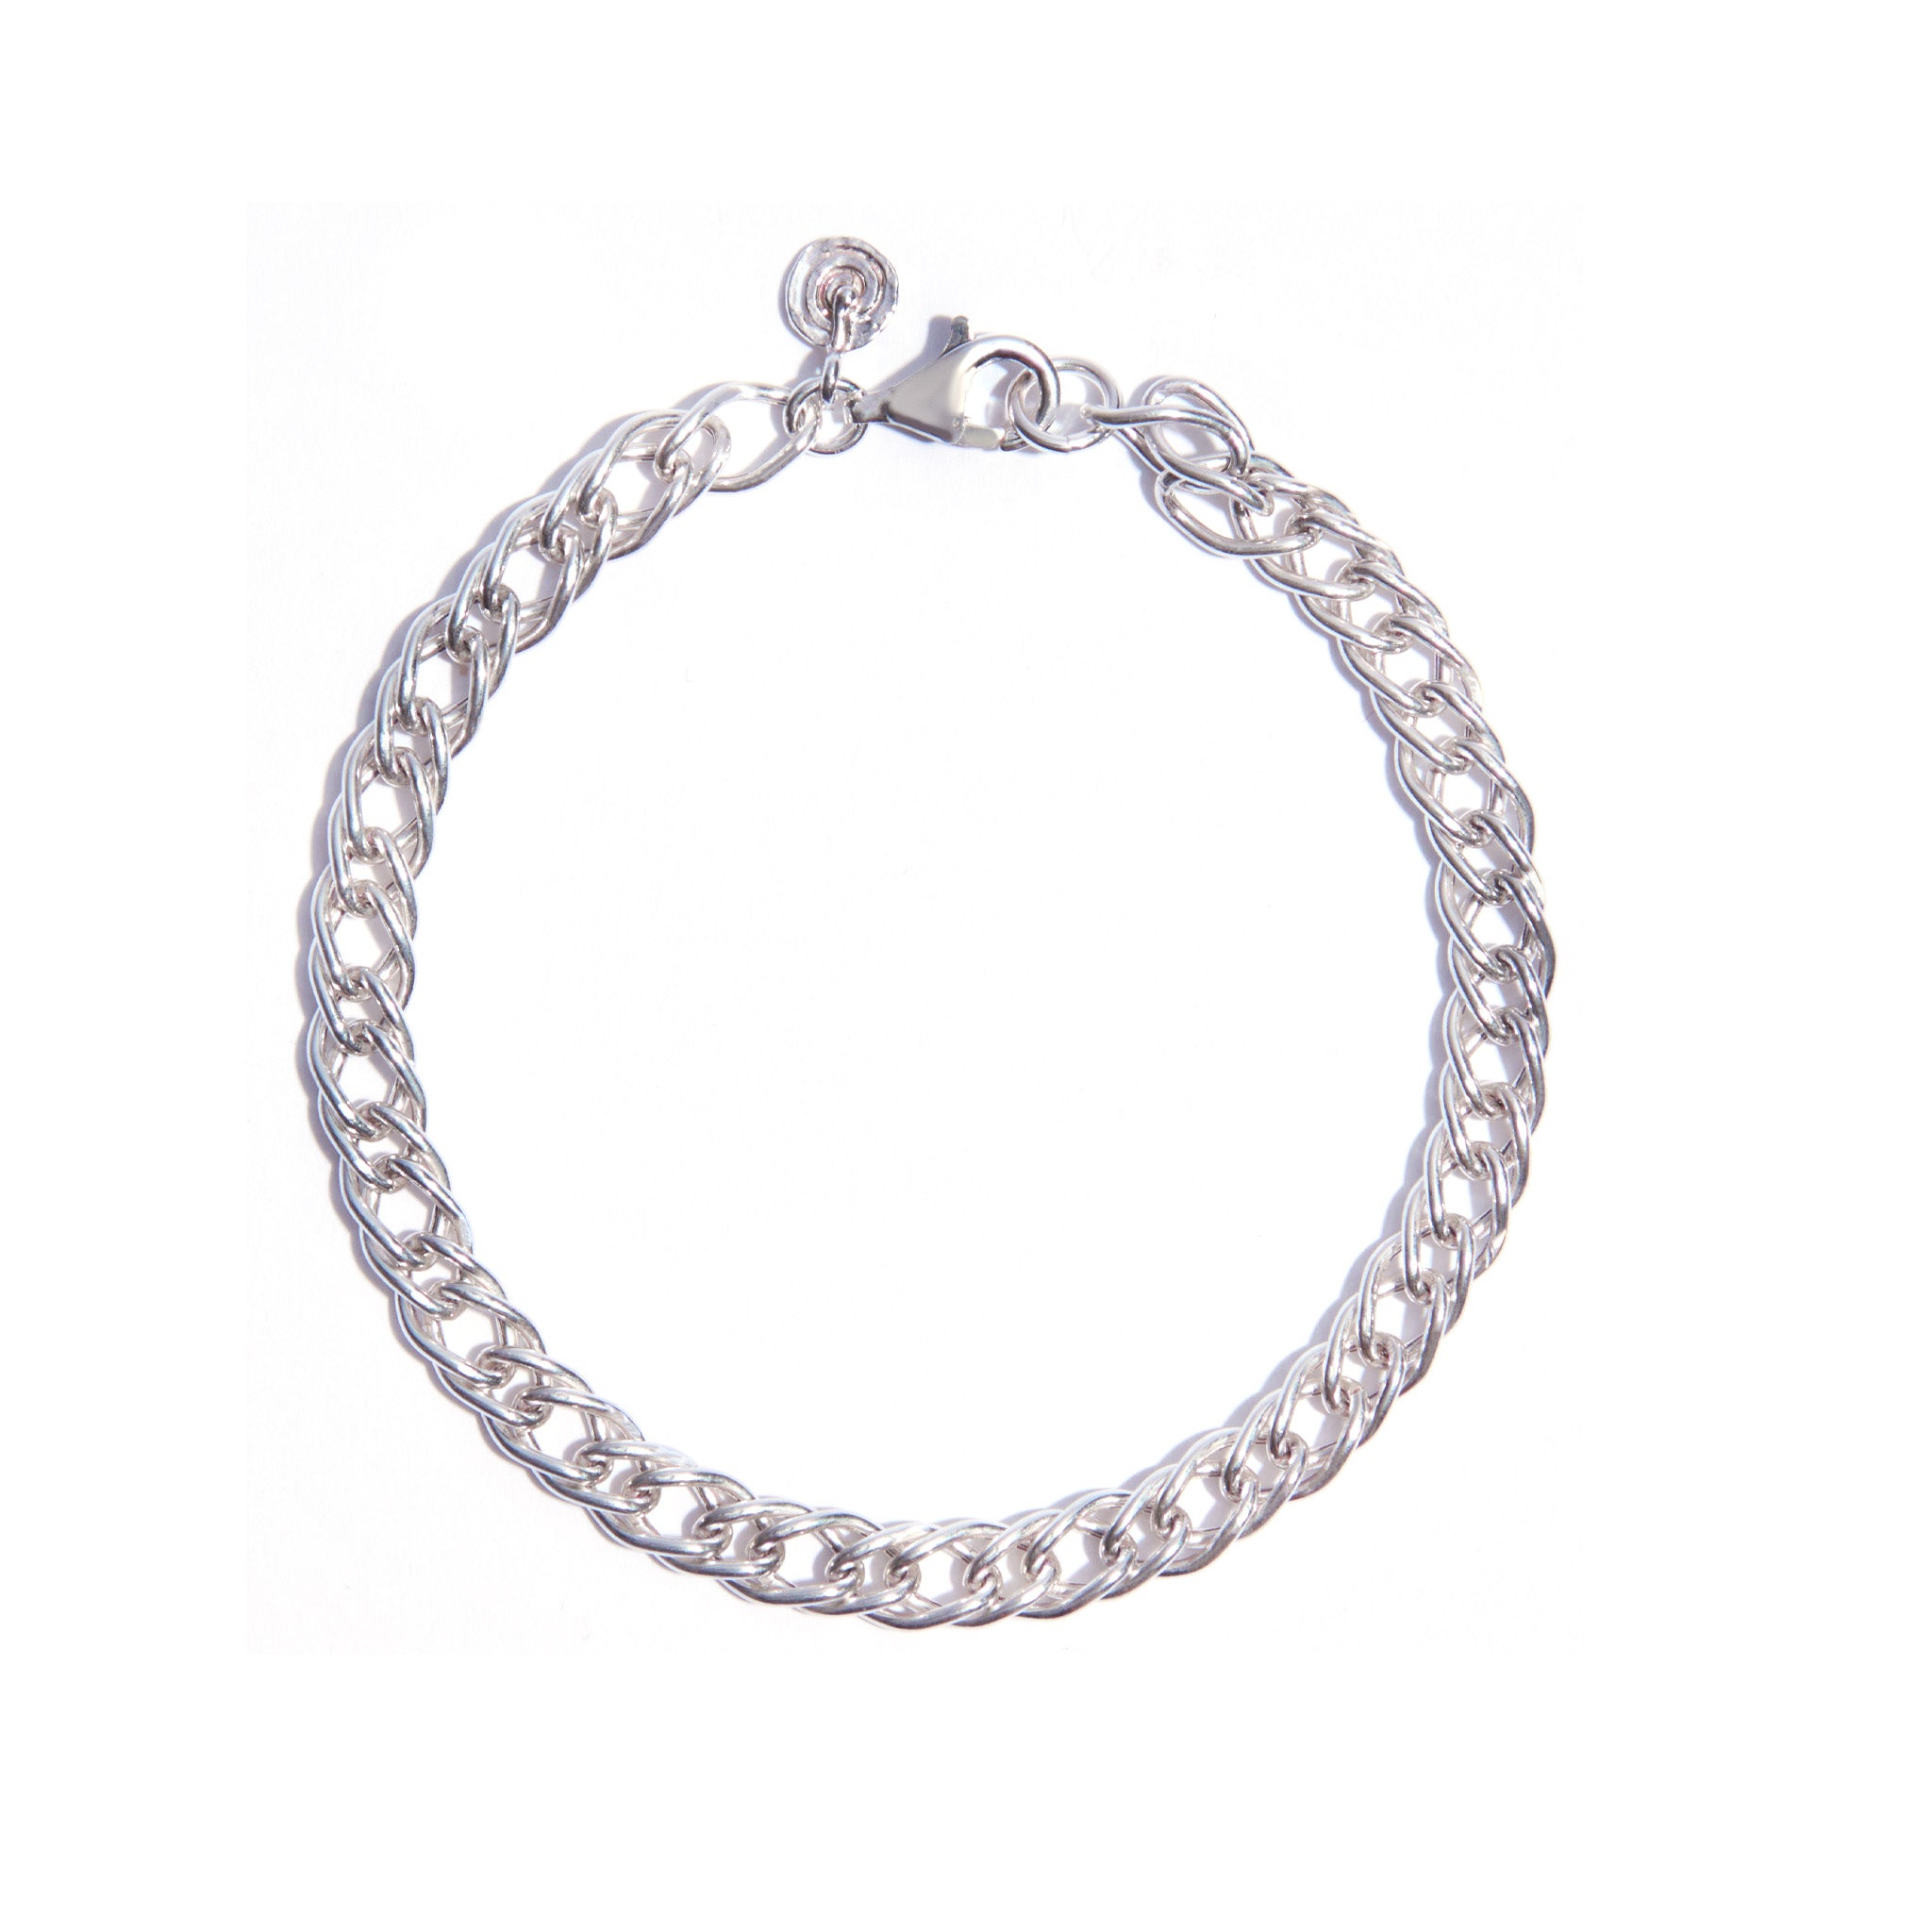 Discover timeless sophistication with our Classic Elegance Silver Bracelet. Crafted with precision and grace, this exquisite piece exudes refined charm, making it the perfect accessory for any occasion. Elevate your style with understated luxury and enduring beauty.